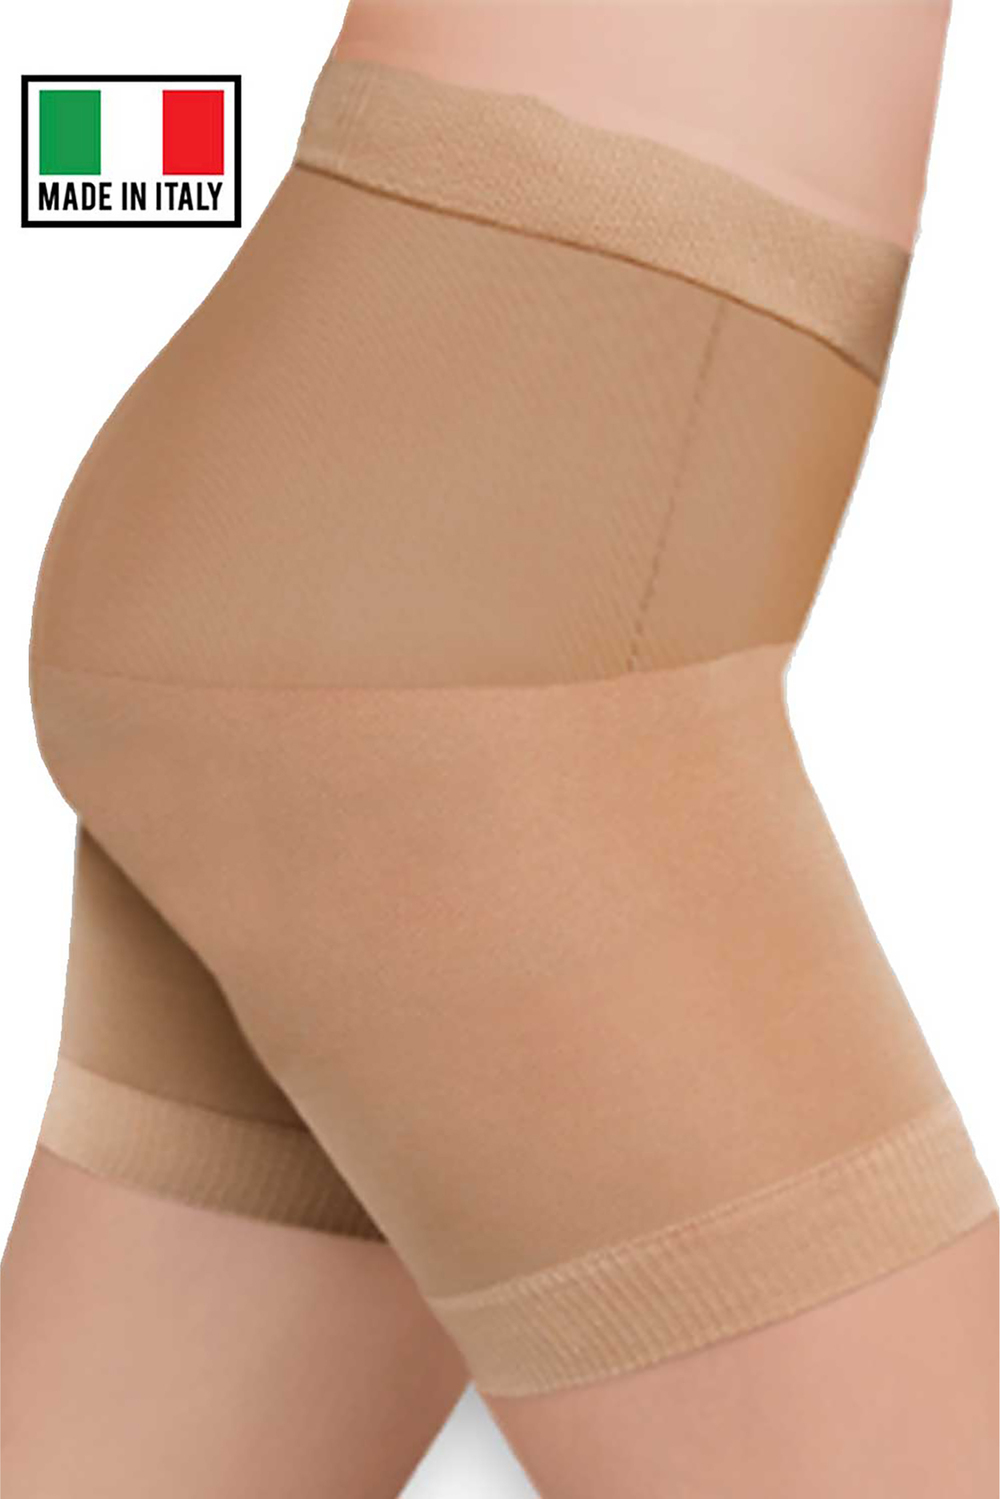 ShapeOn - Tummy slimming short with non-rolling silicone band, medium (M), nude